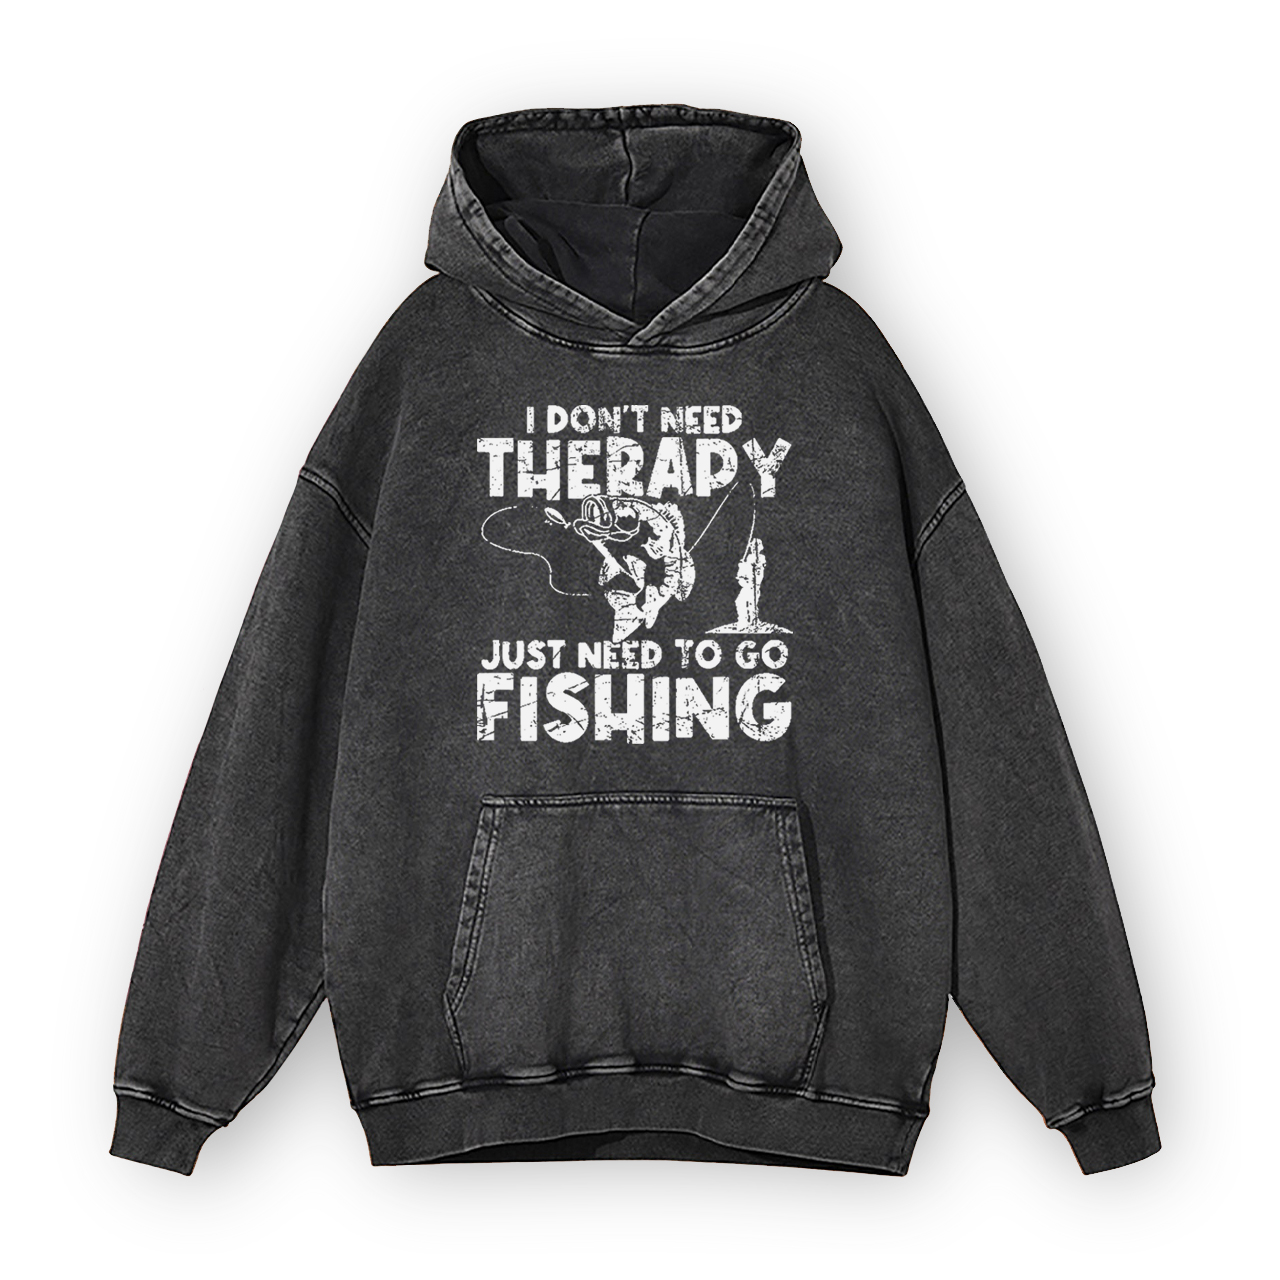 I Don't Need Therapy Just Need To Go Fishing Garment-Dye Hoodies